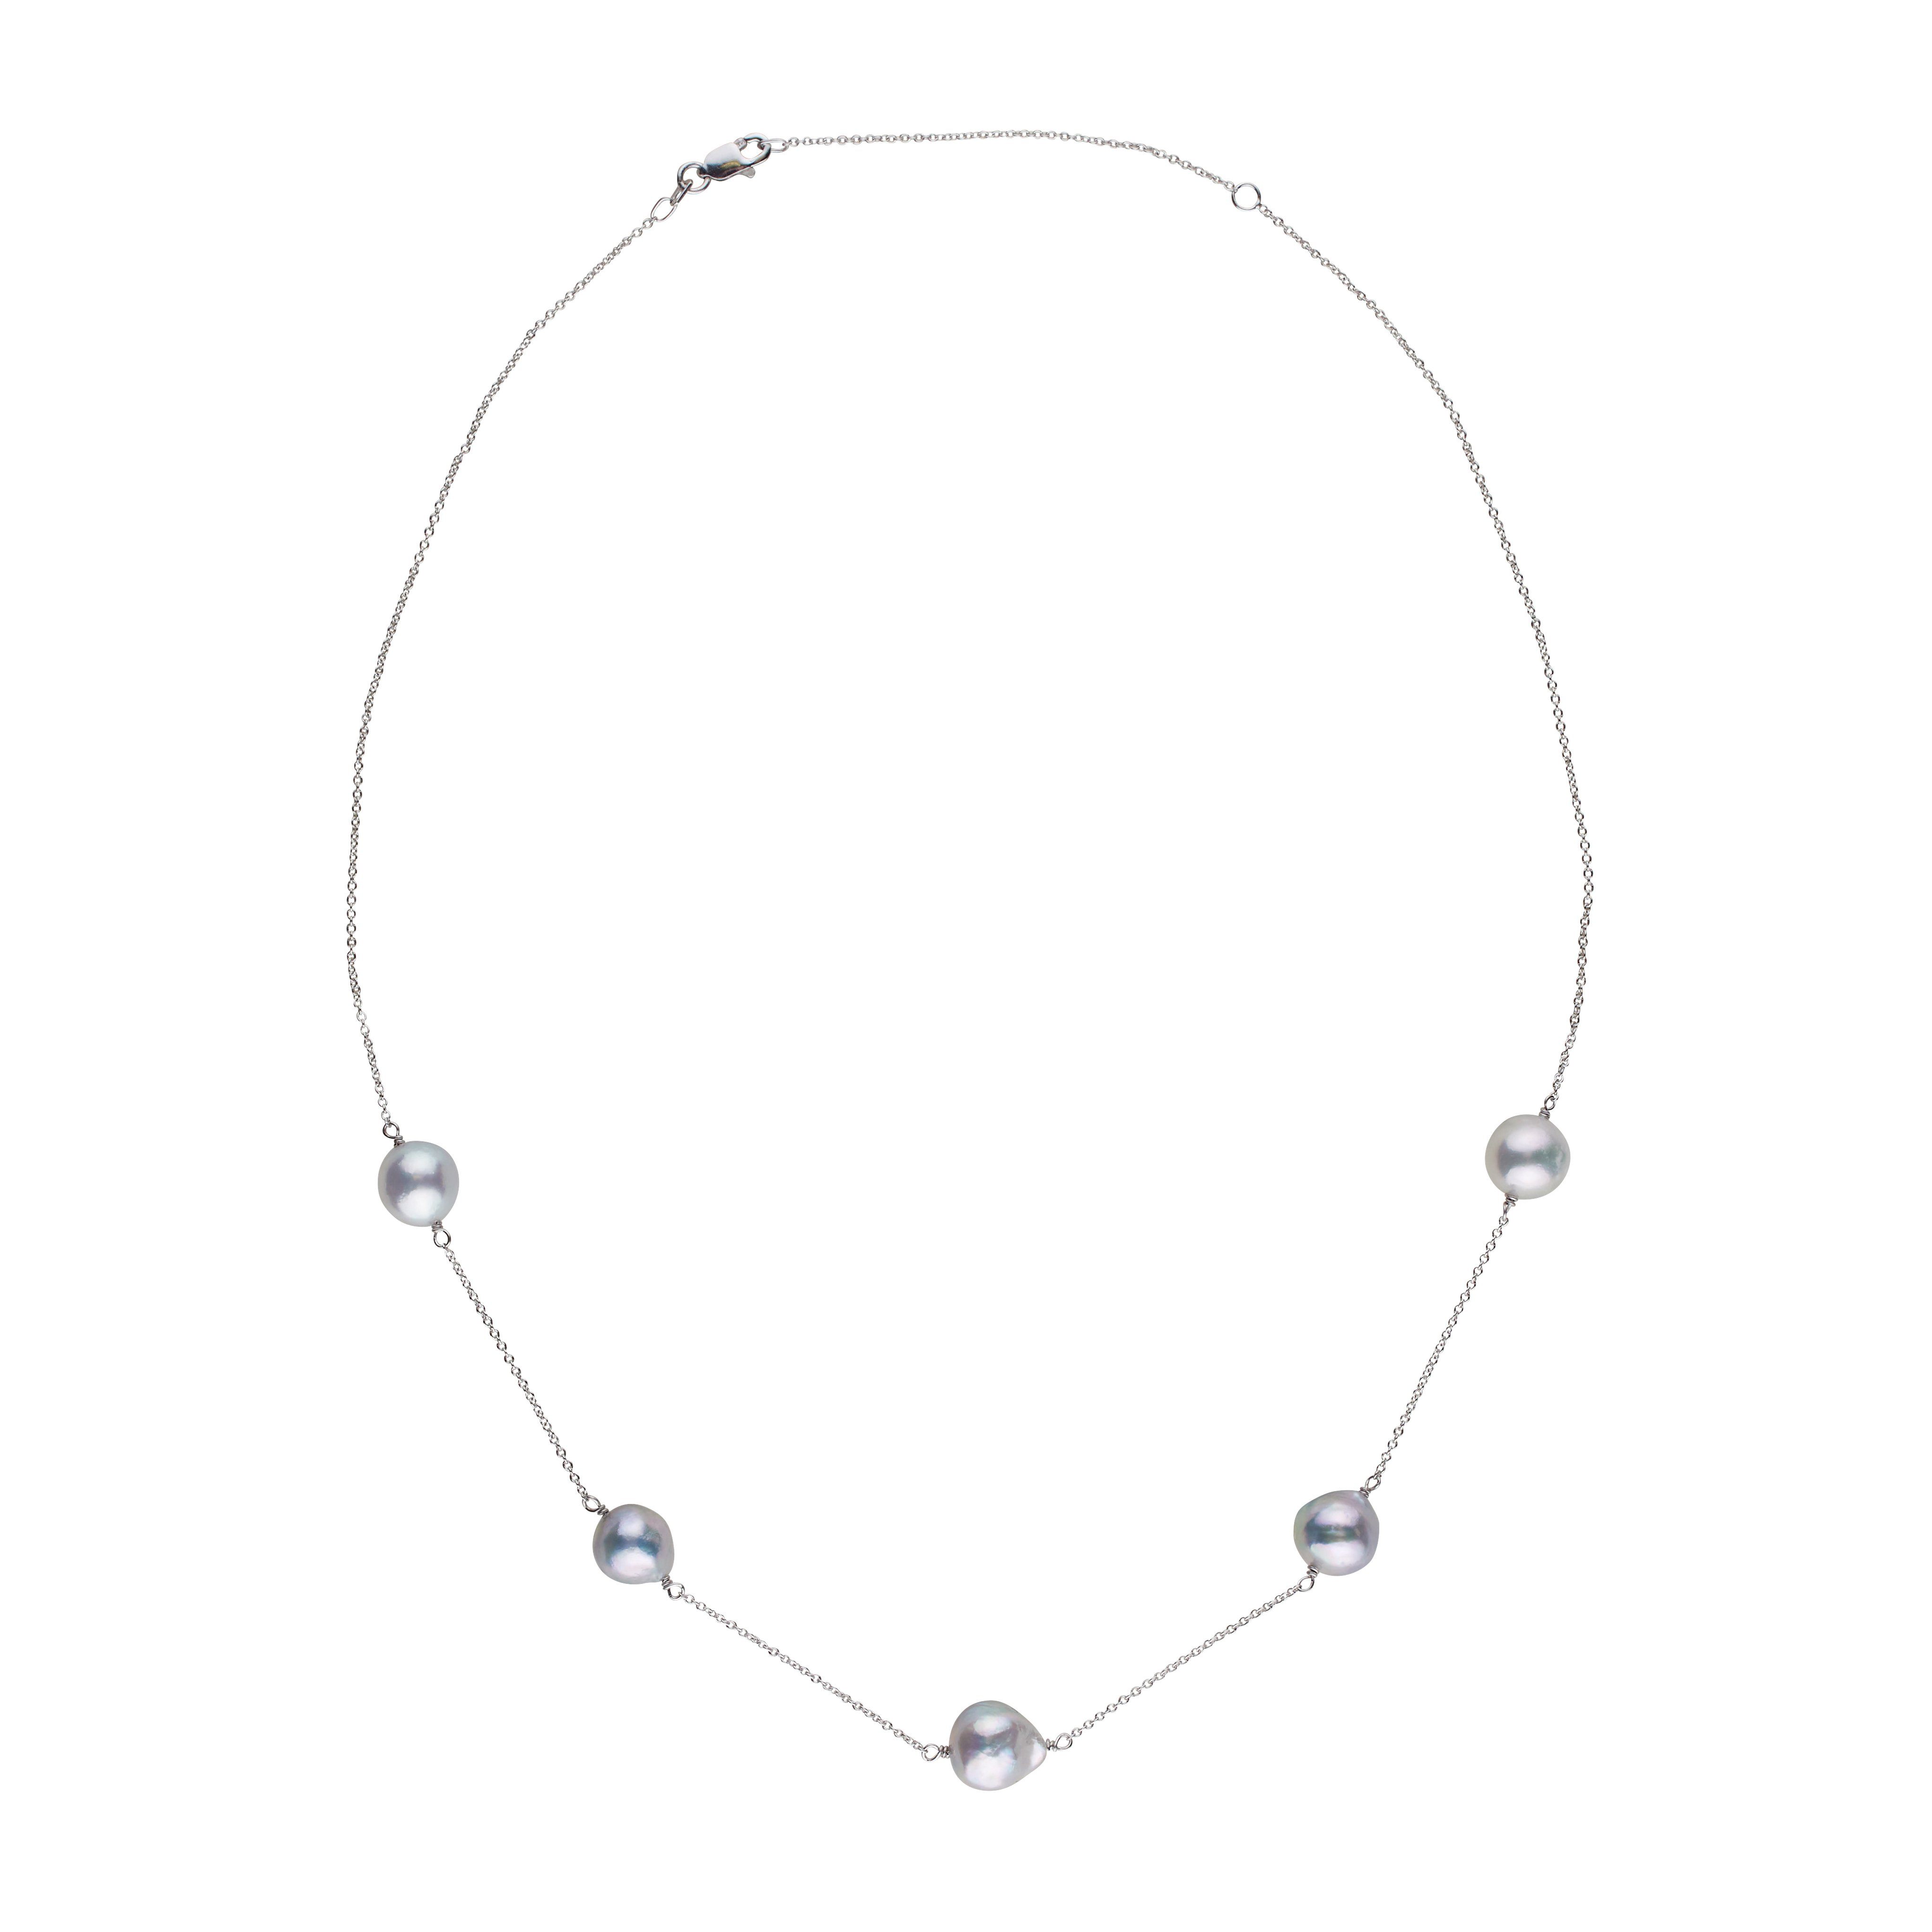 Geologie iets expositie Terra Collection Silver Blue Akoya Pearl Necklace